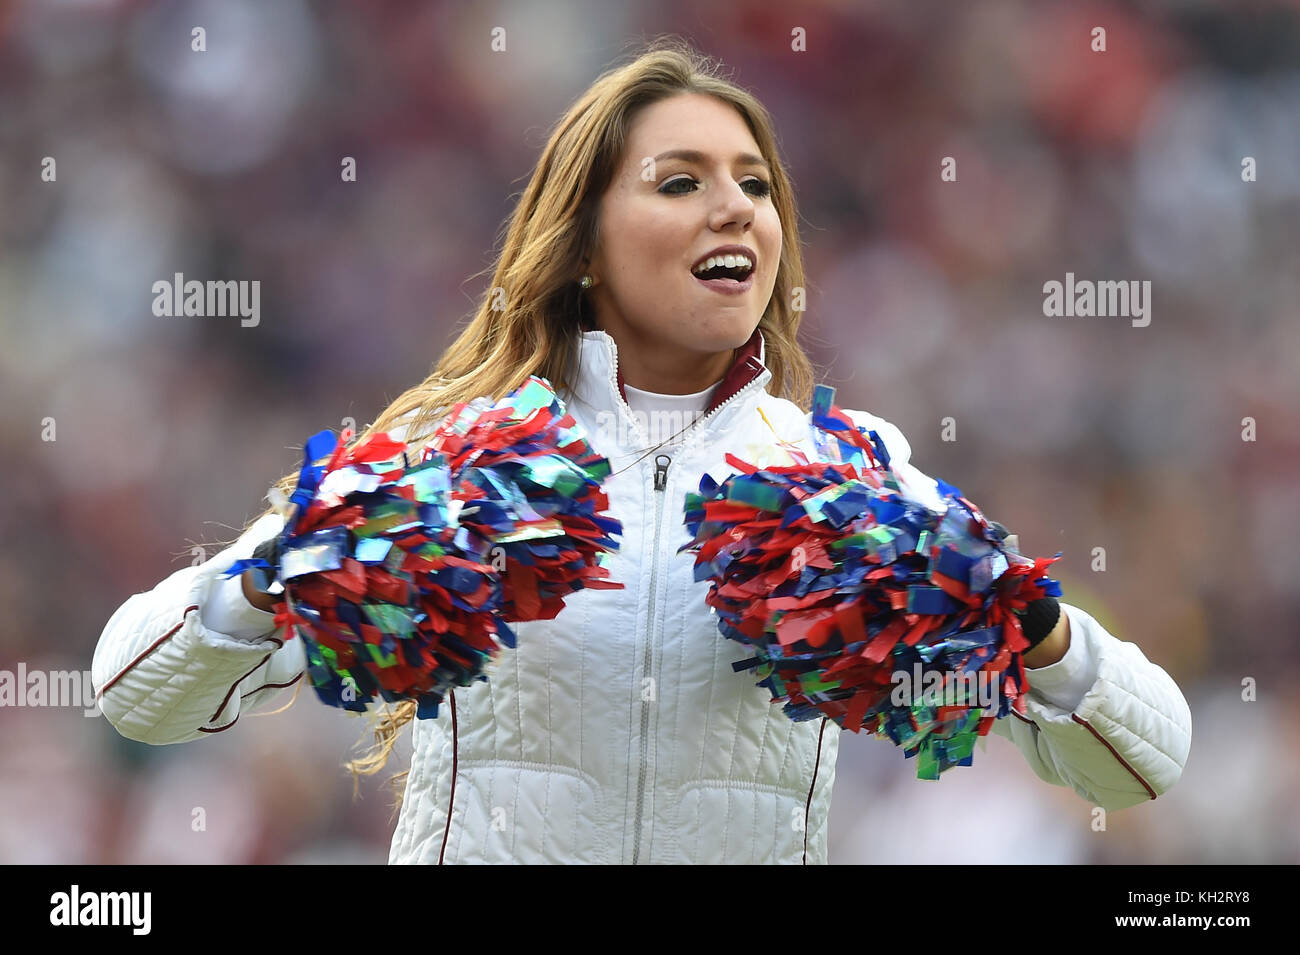 Landover, MD, USA. 12th Nov, 2017. A Washington Redskin cheerleader performs during the matchup between the Minnesota Vikings and the Washington Redskins at FedEx Field in Landover, MD. Credit: csm/Alamy Live News Stock Photo